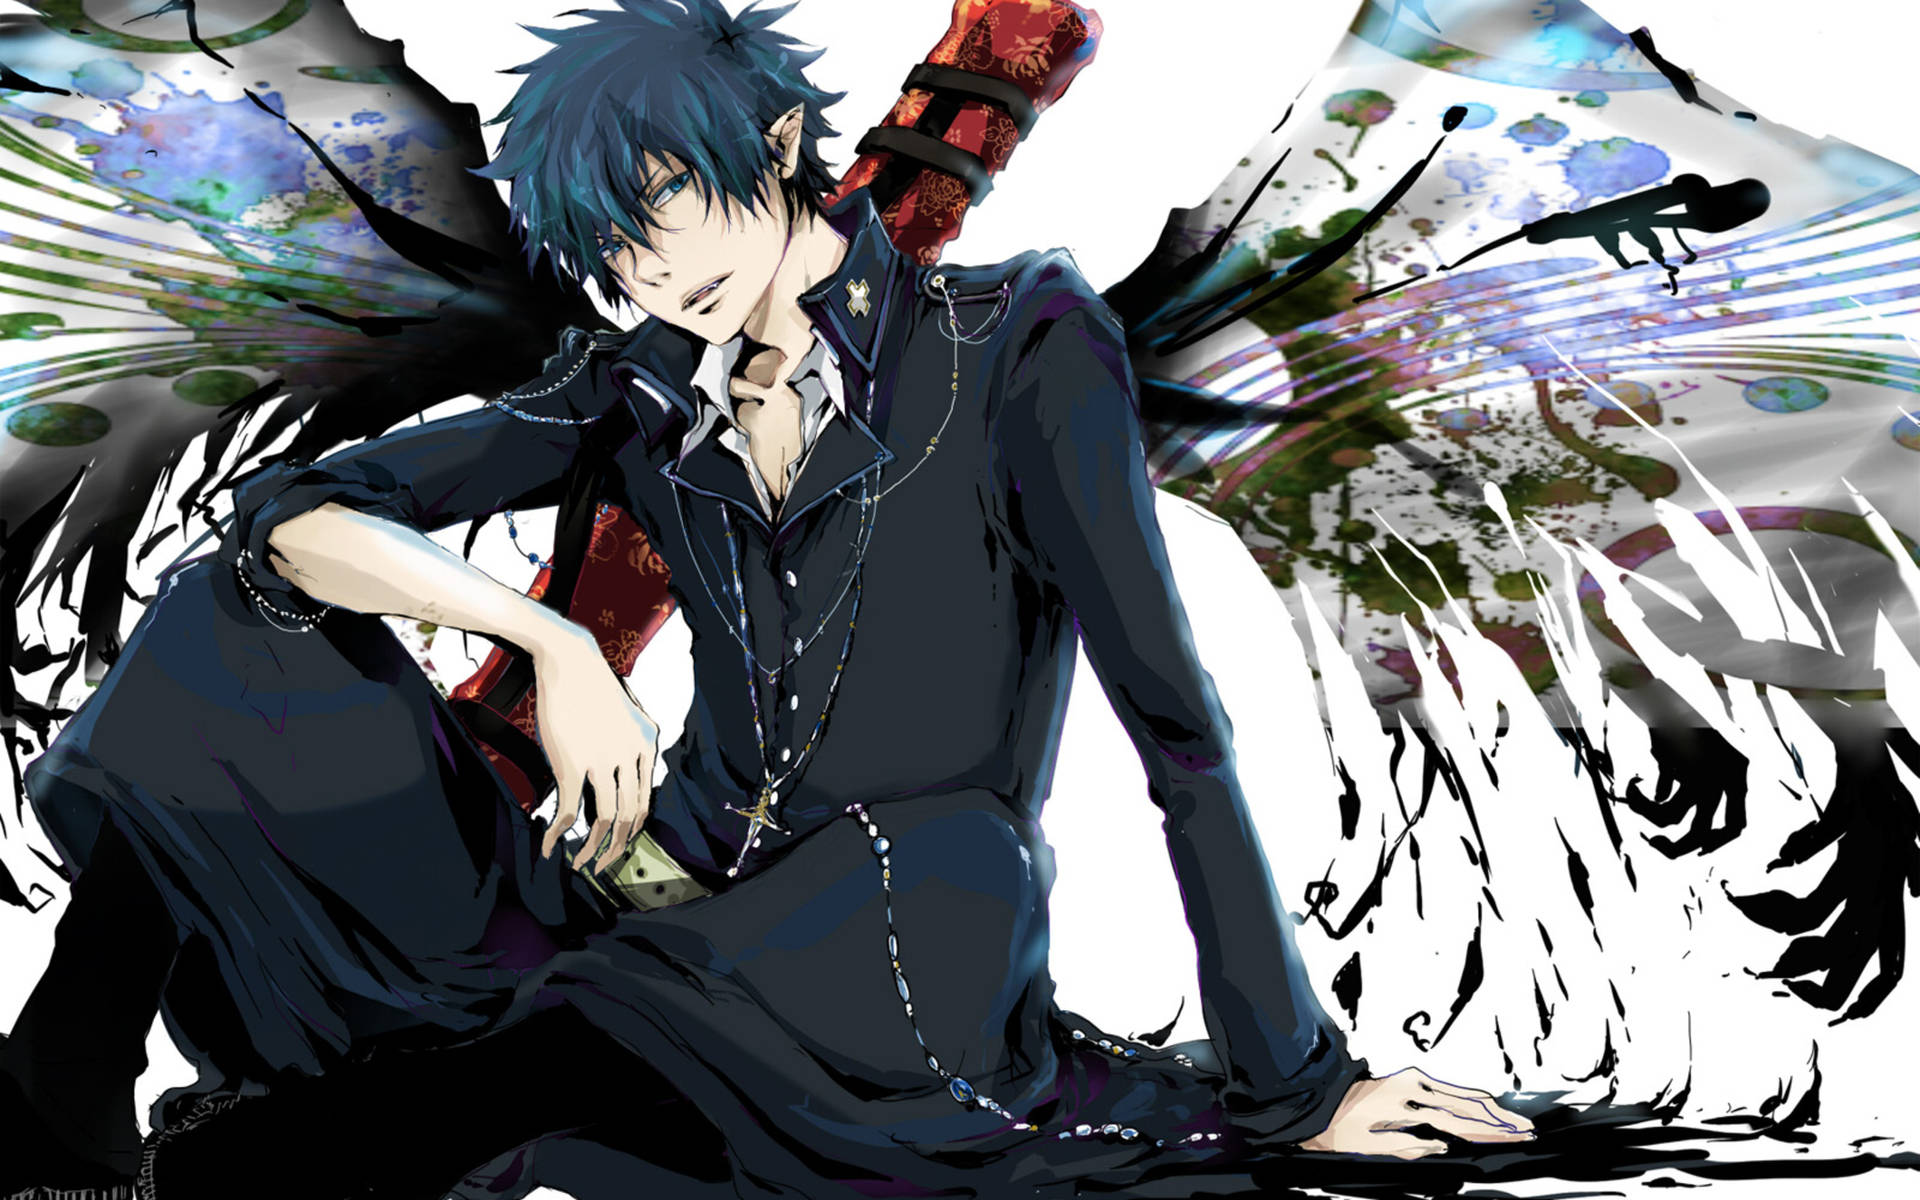 Rin Okumura achieves his wings in Blue Exorcist Wallpaper